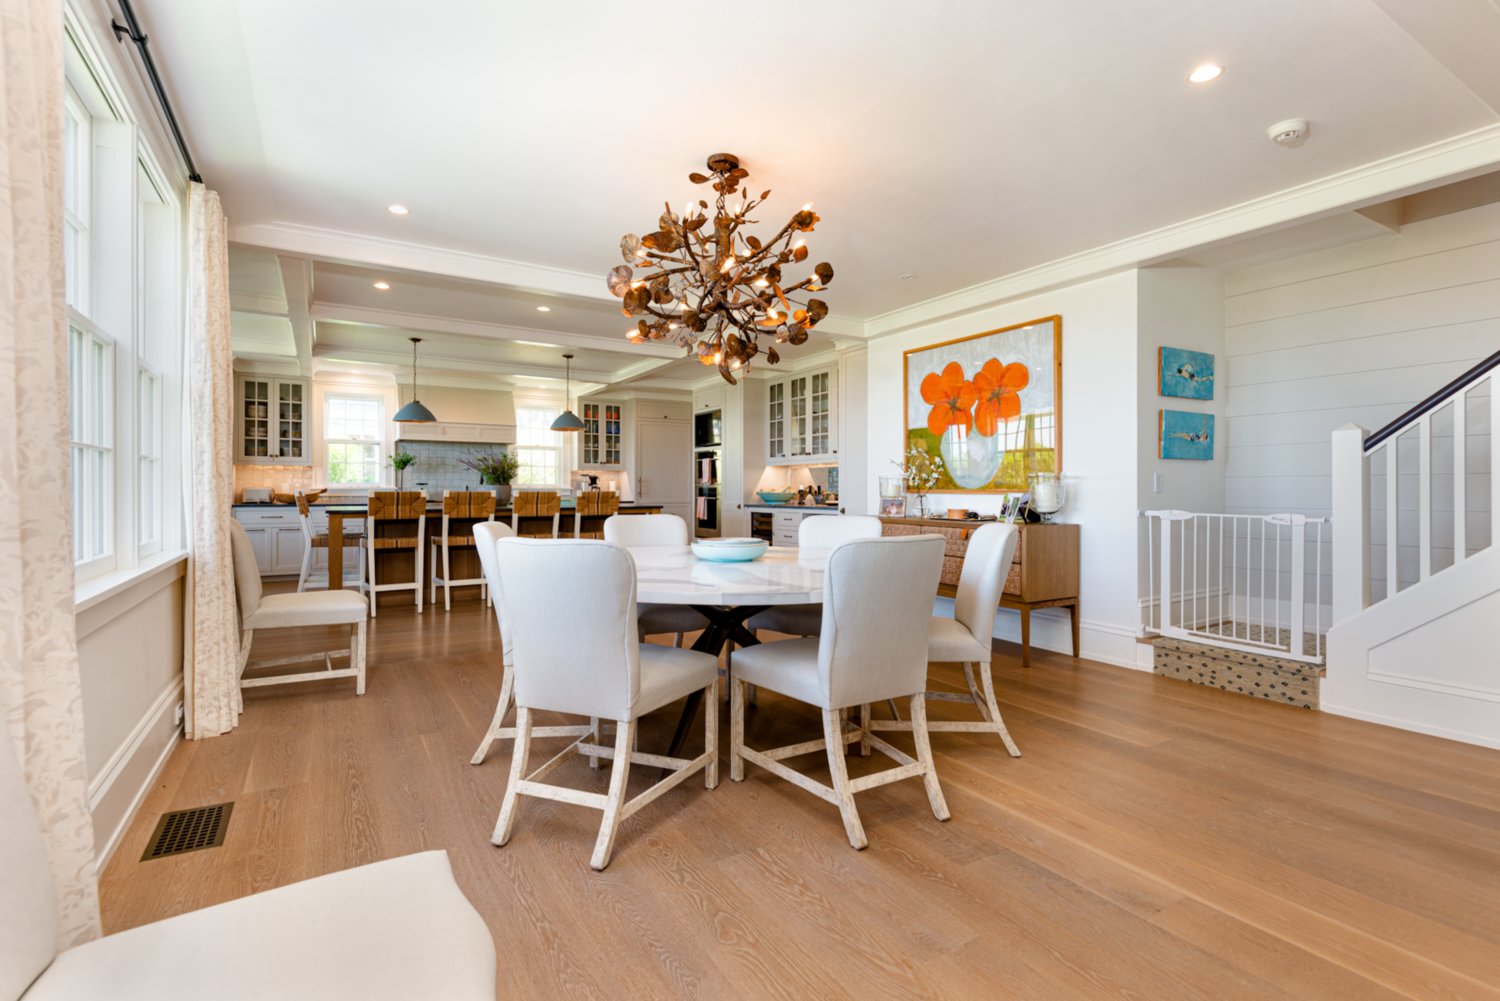 The dining area is located off the kitchen in the open-concept first floor.